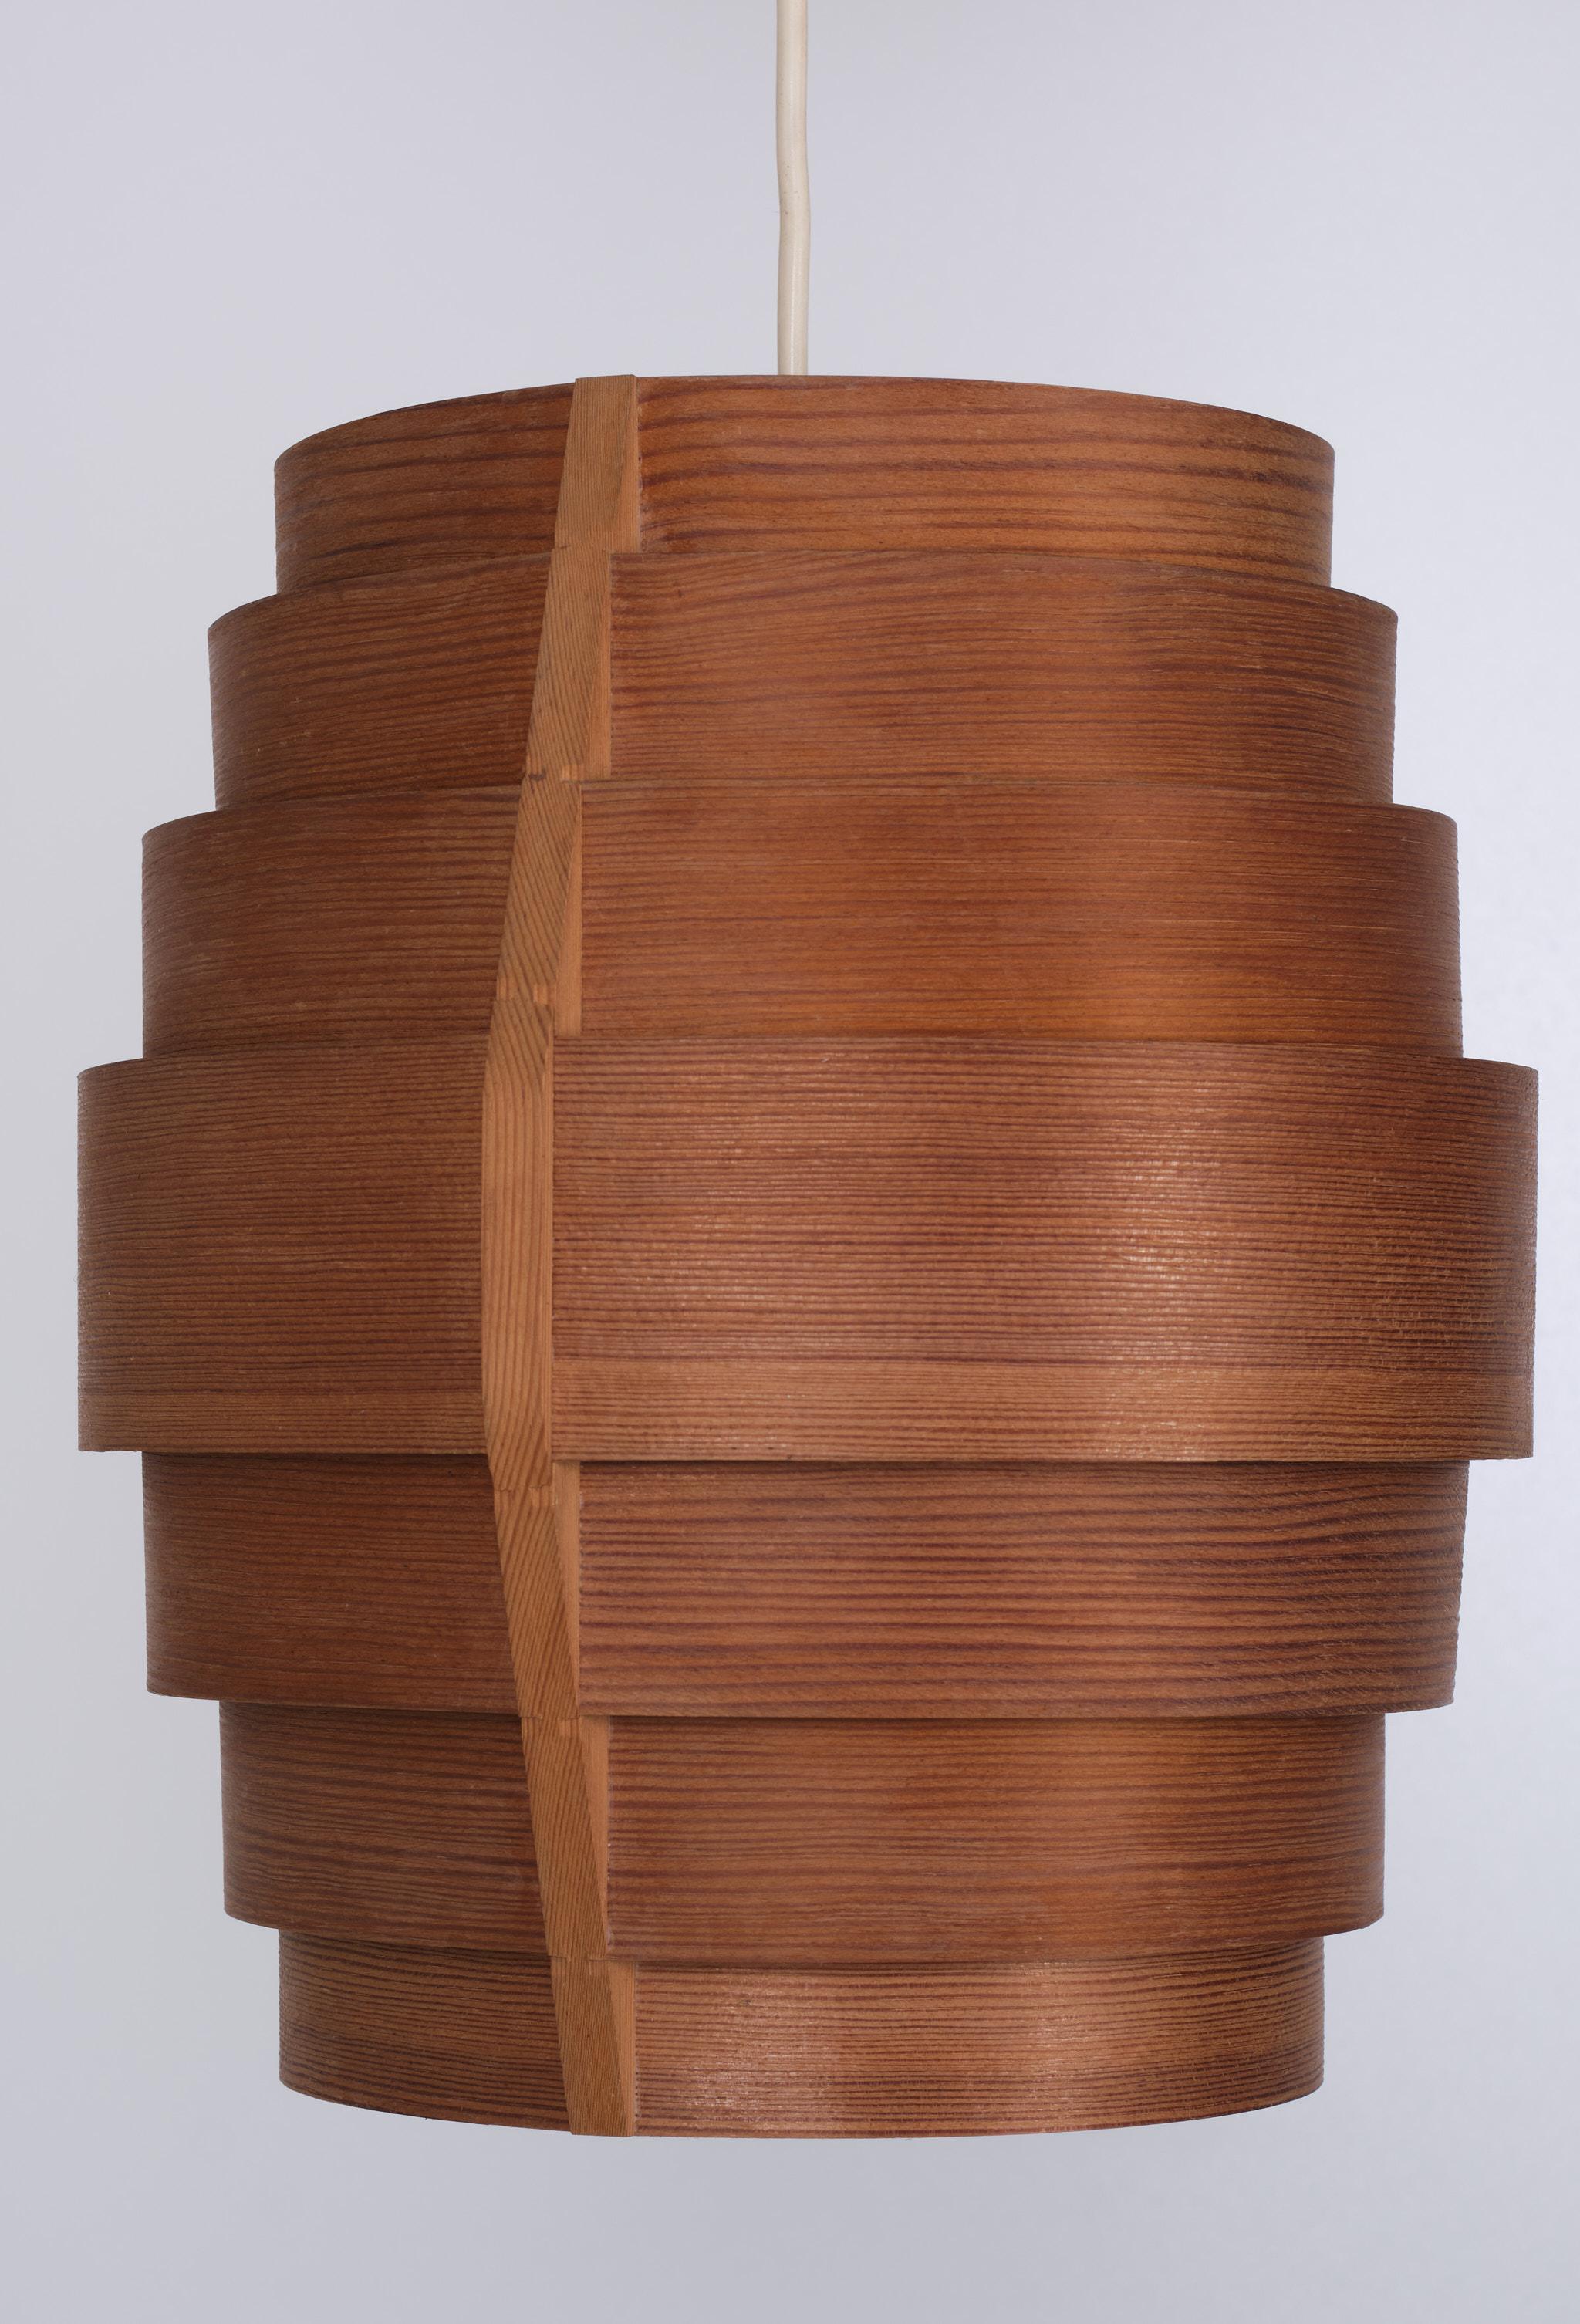 Vintage design hanging lamp. Designed in the mid-sixties by the Swedish designer Hans Agne Jakobsson. The lamp is made up of rings of plywood and has a wooden frame. The condition is good considering the age, no damage, see the detail photos. Size: